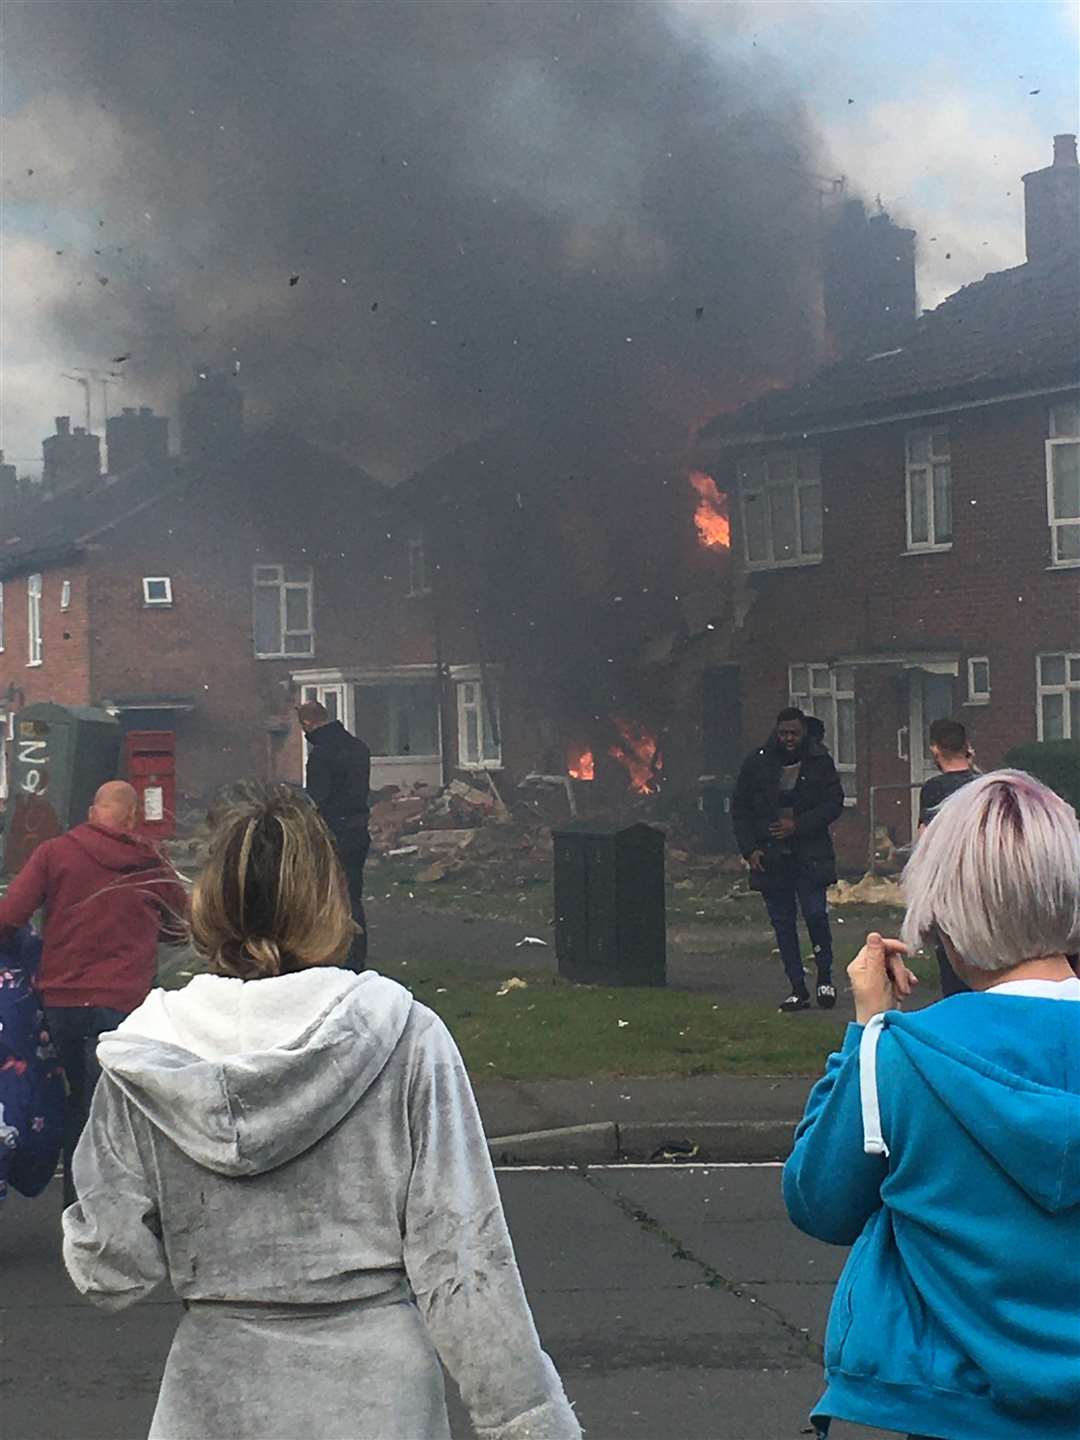 The immediate aftermath of the explosion in Mill View, Willesborough